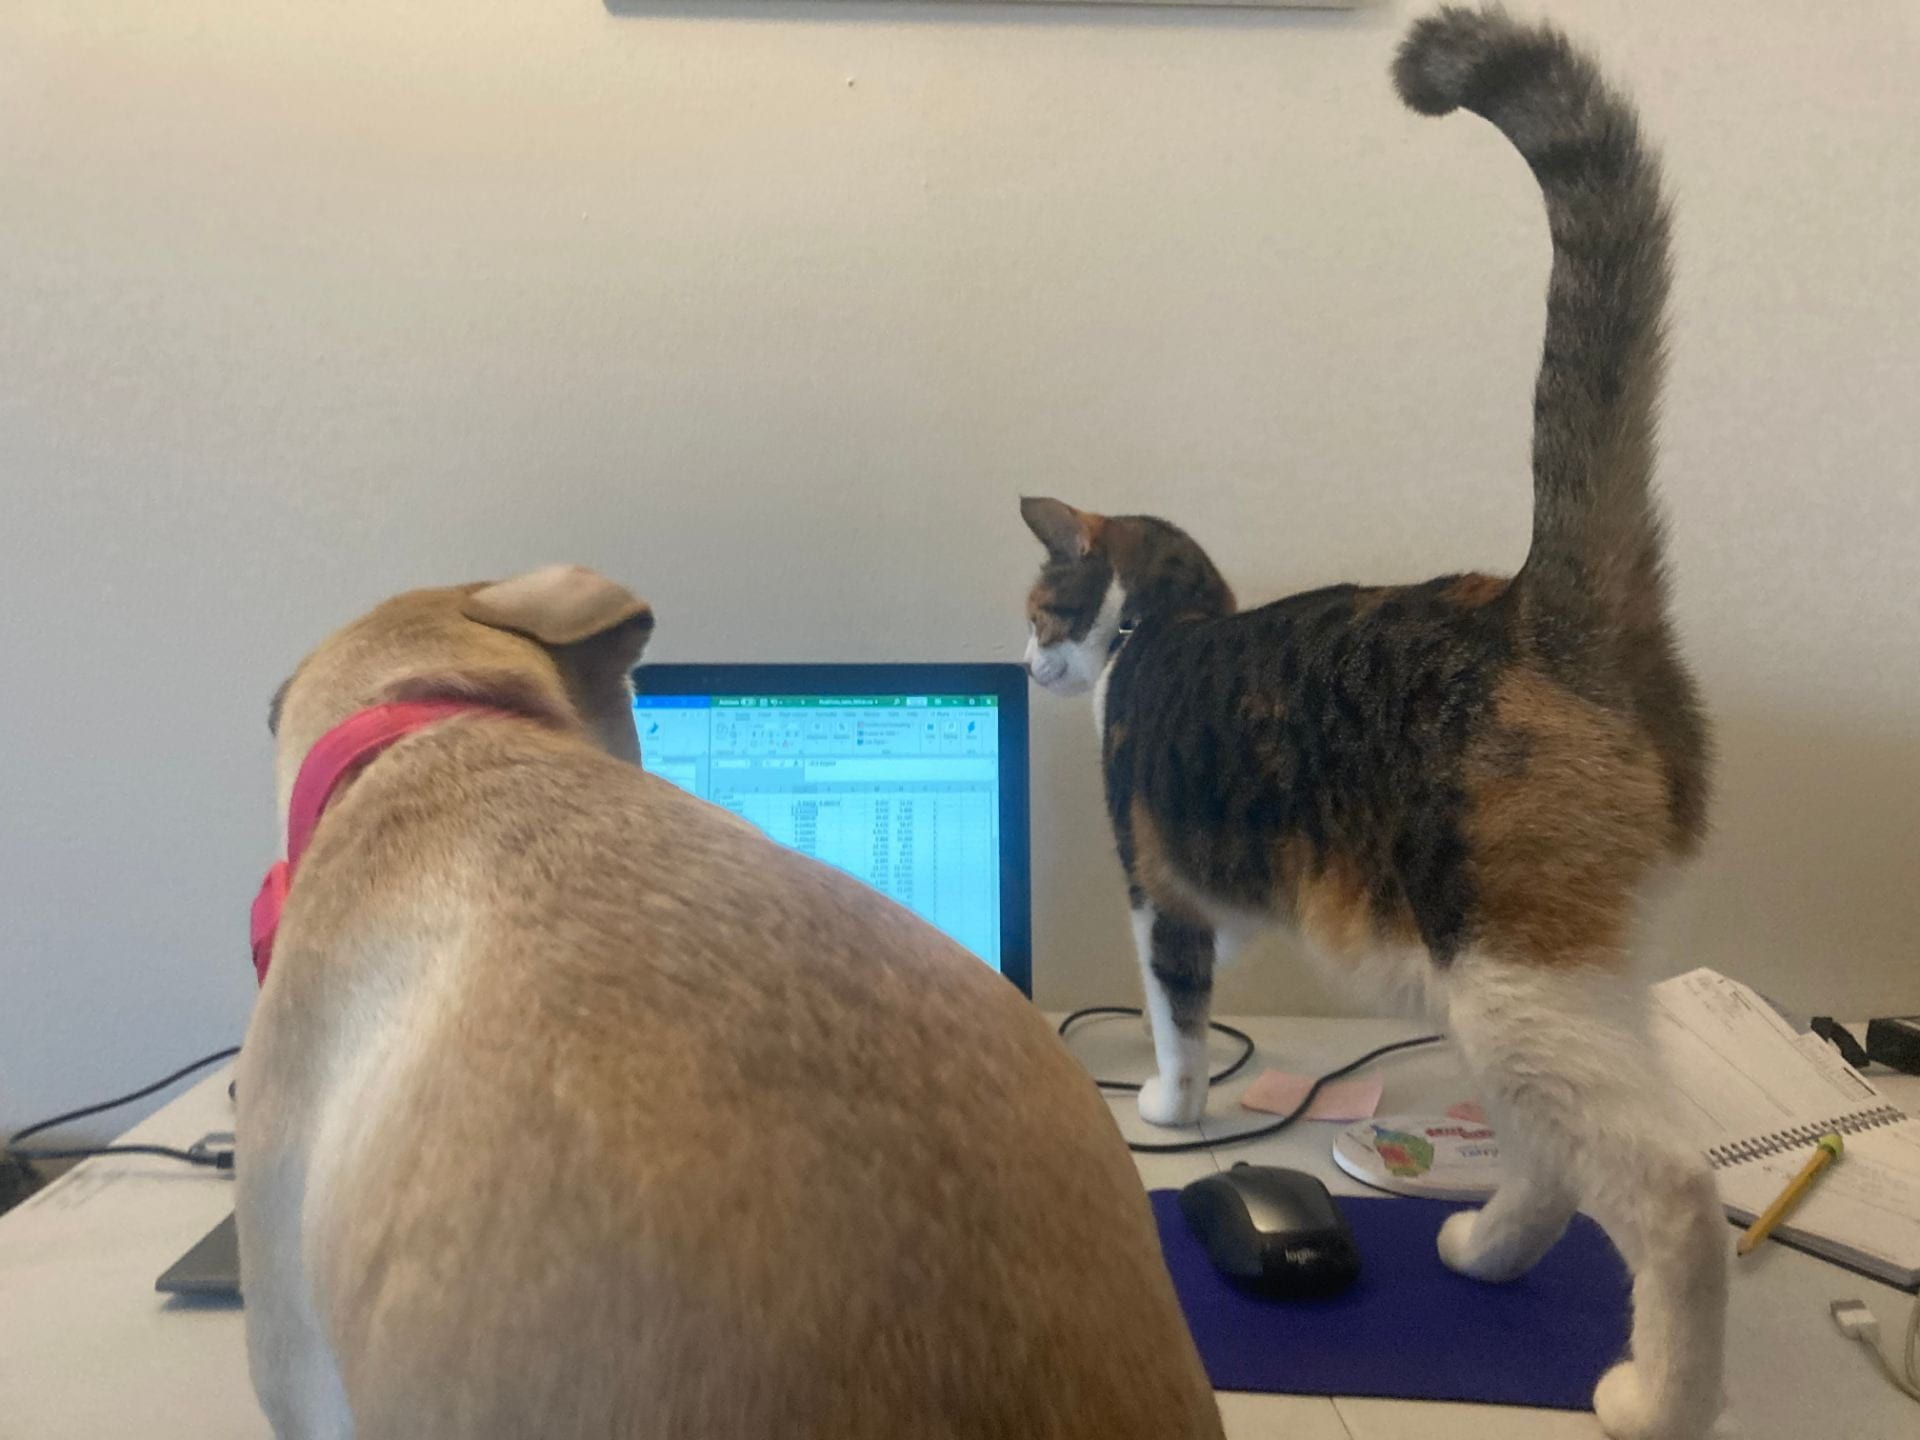 An inquisitive dog and cat get in the way of a computer screen on a work desk.